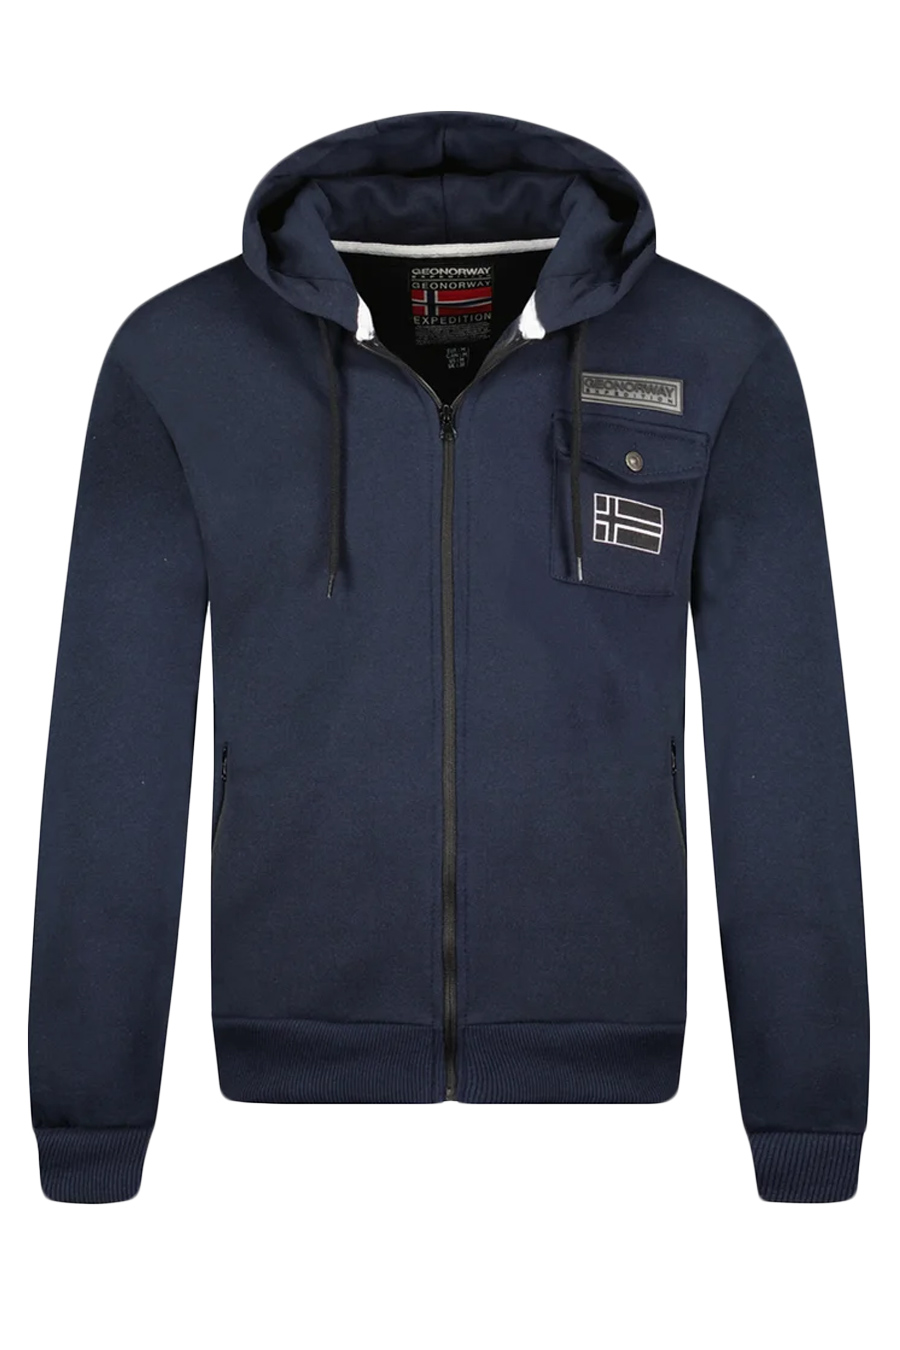 Spordijakid GEOGRAPHICAL NORWAY GUESSY-Navy